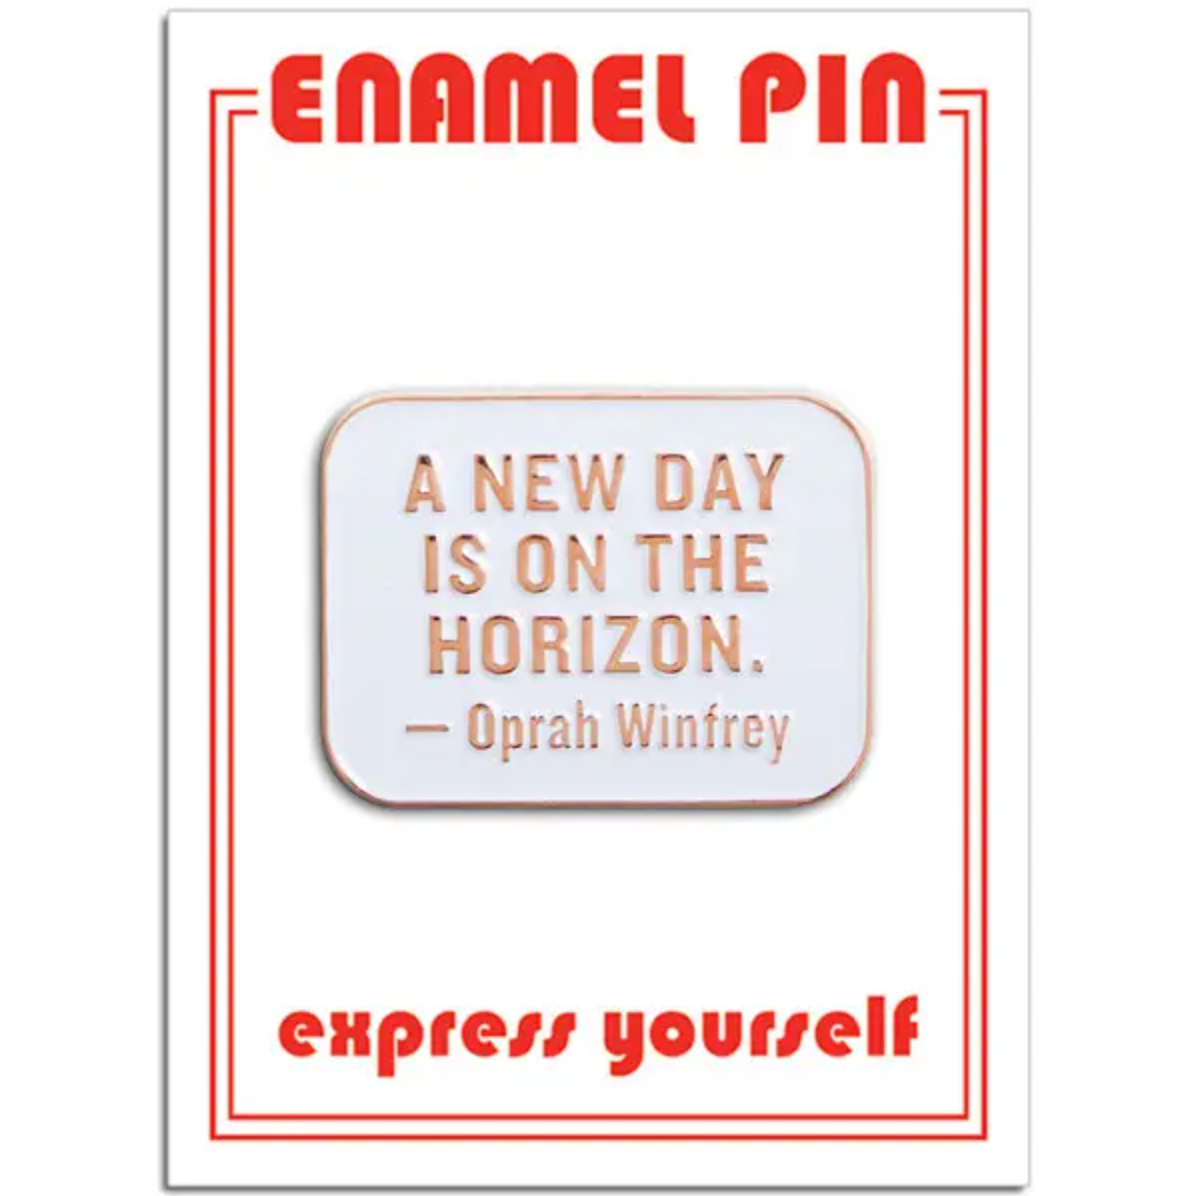 "A New Day is on the Horizon" Pin